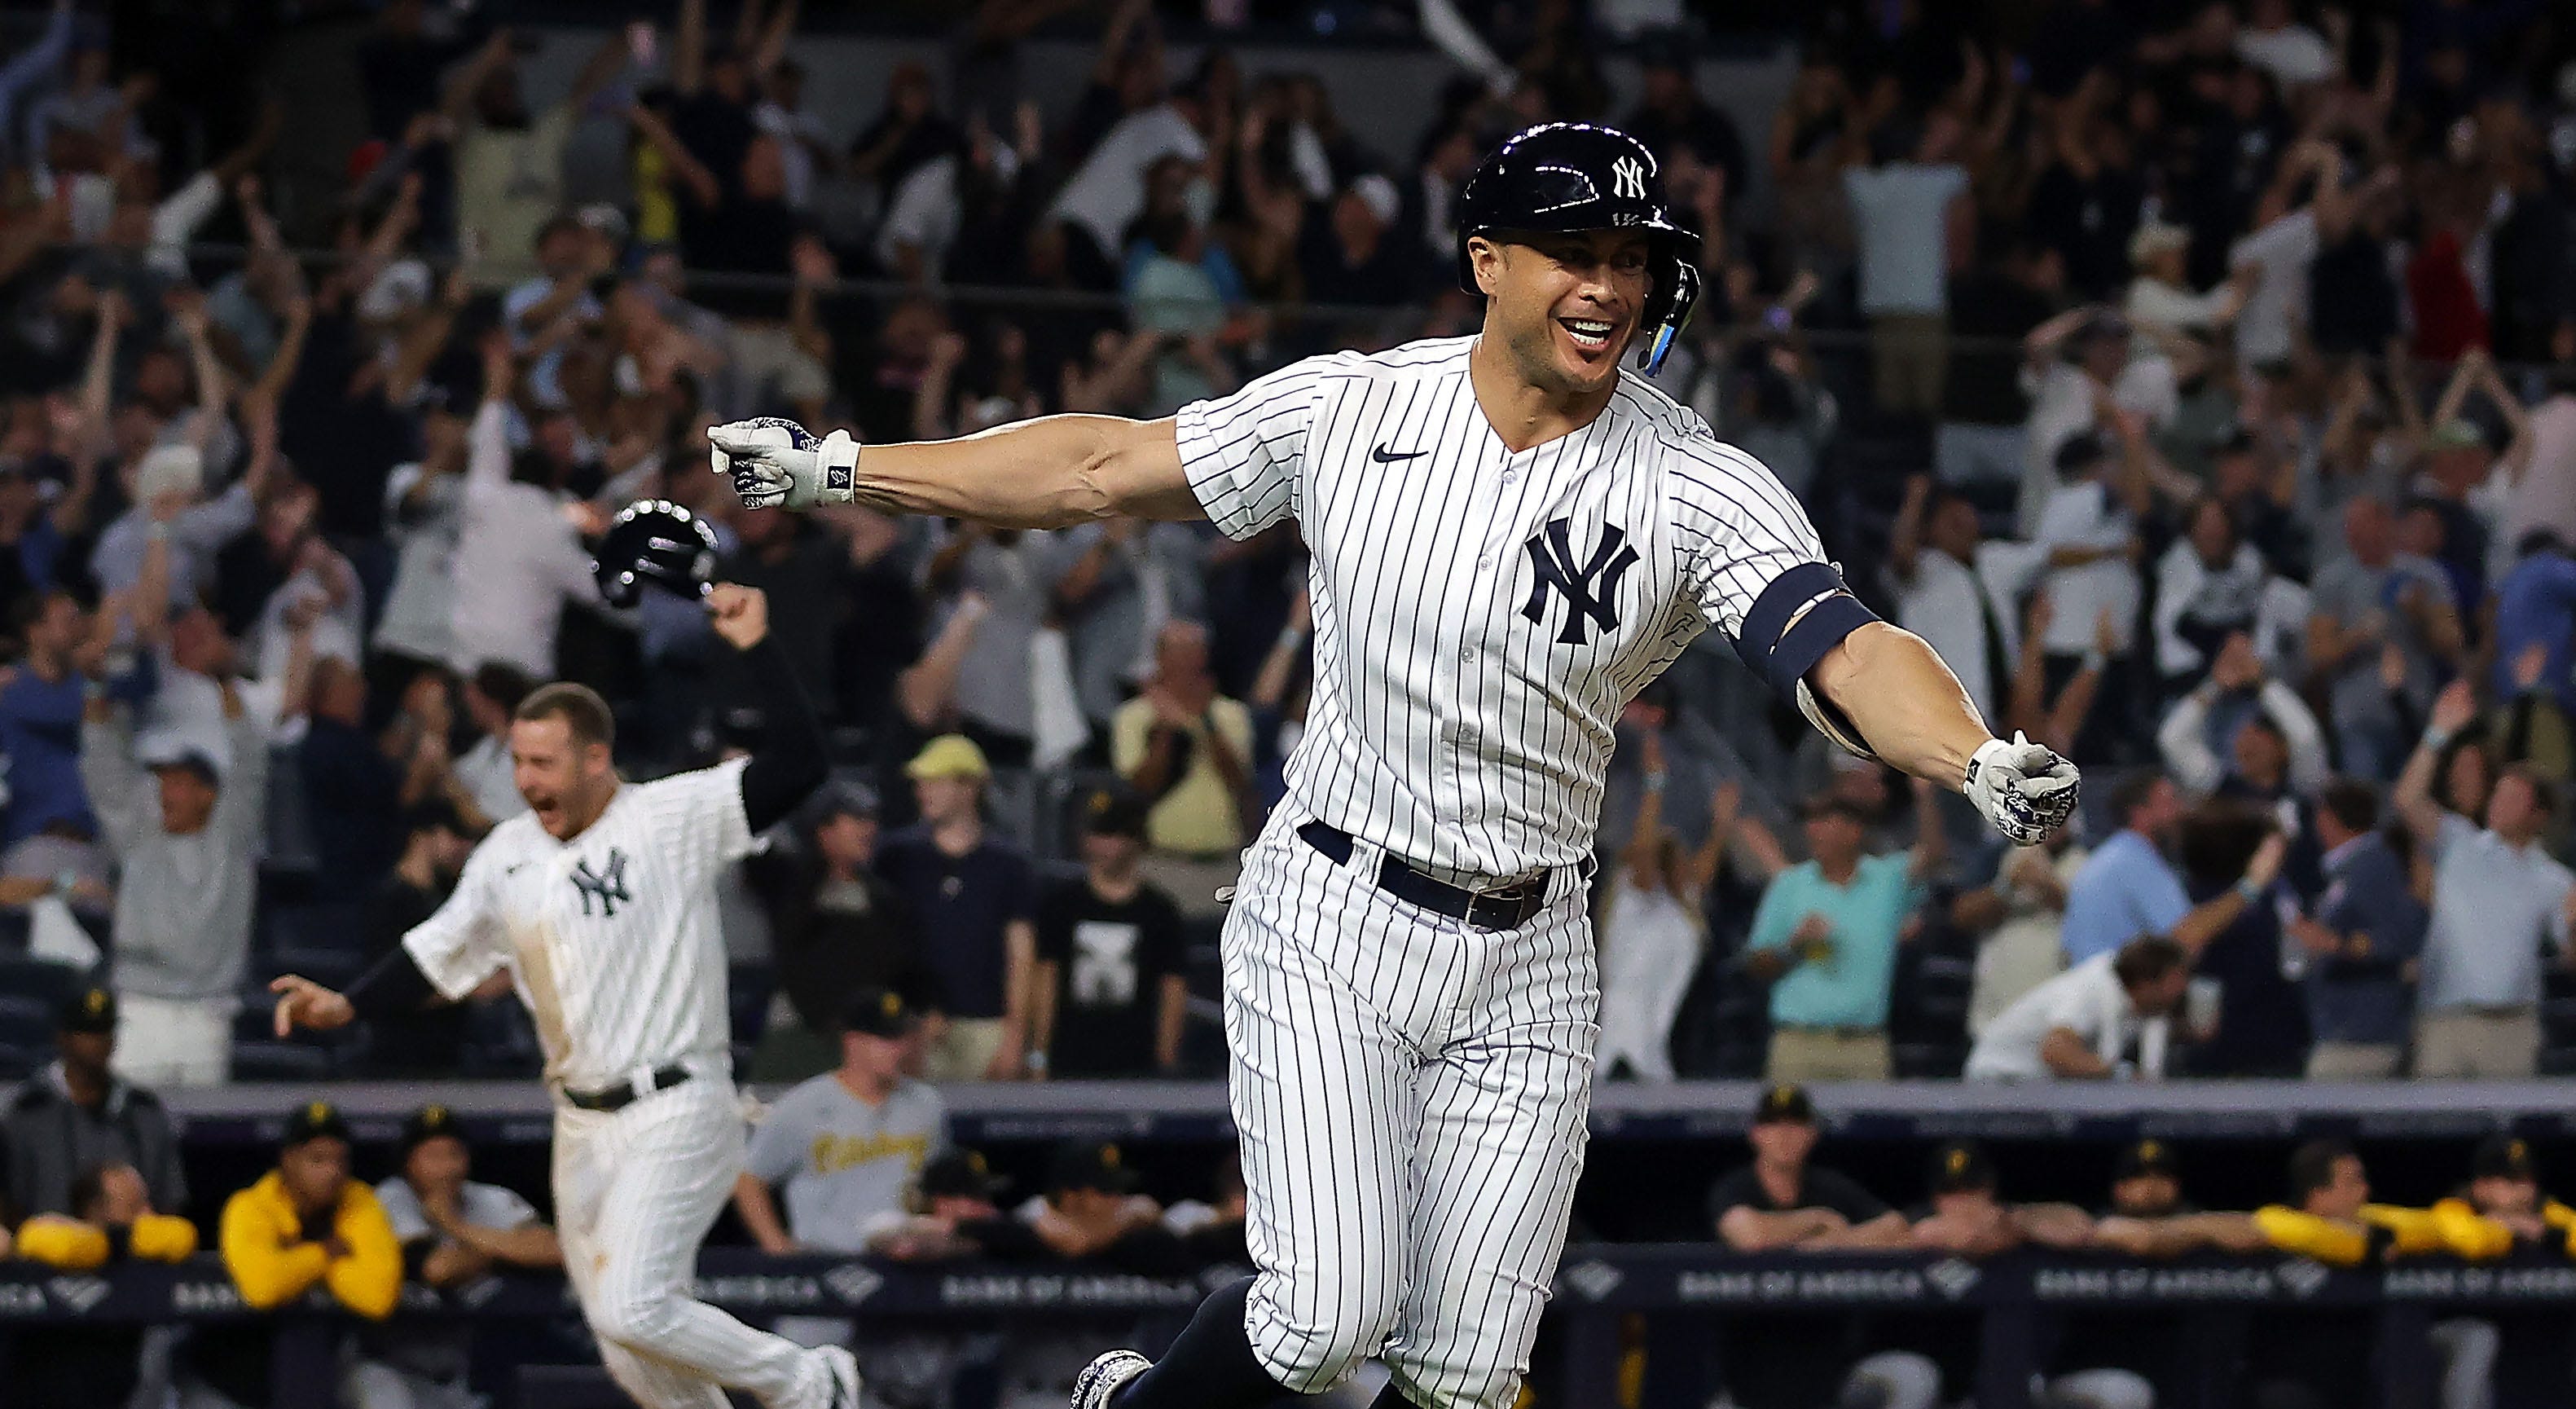 Aaron Judge's 60th home run sparks miraculous Yankees comeback win